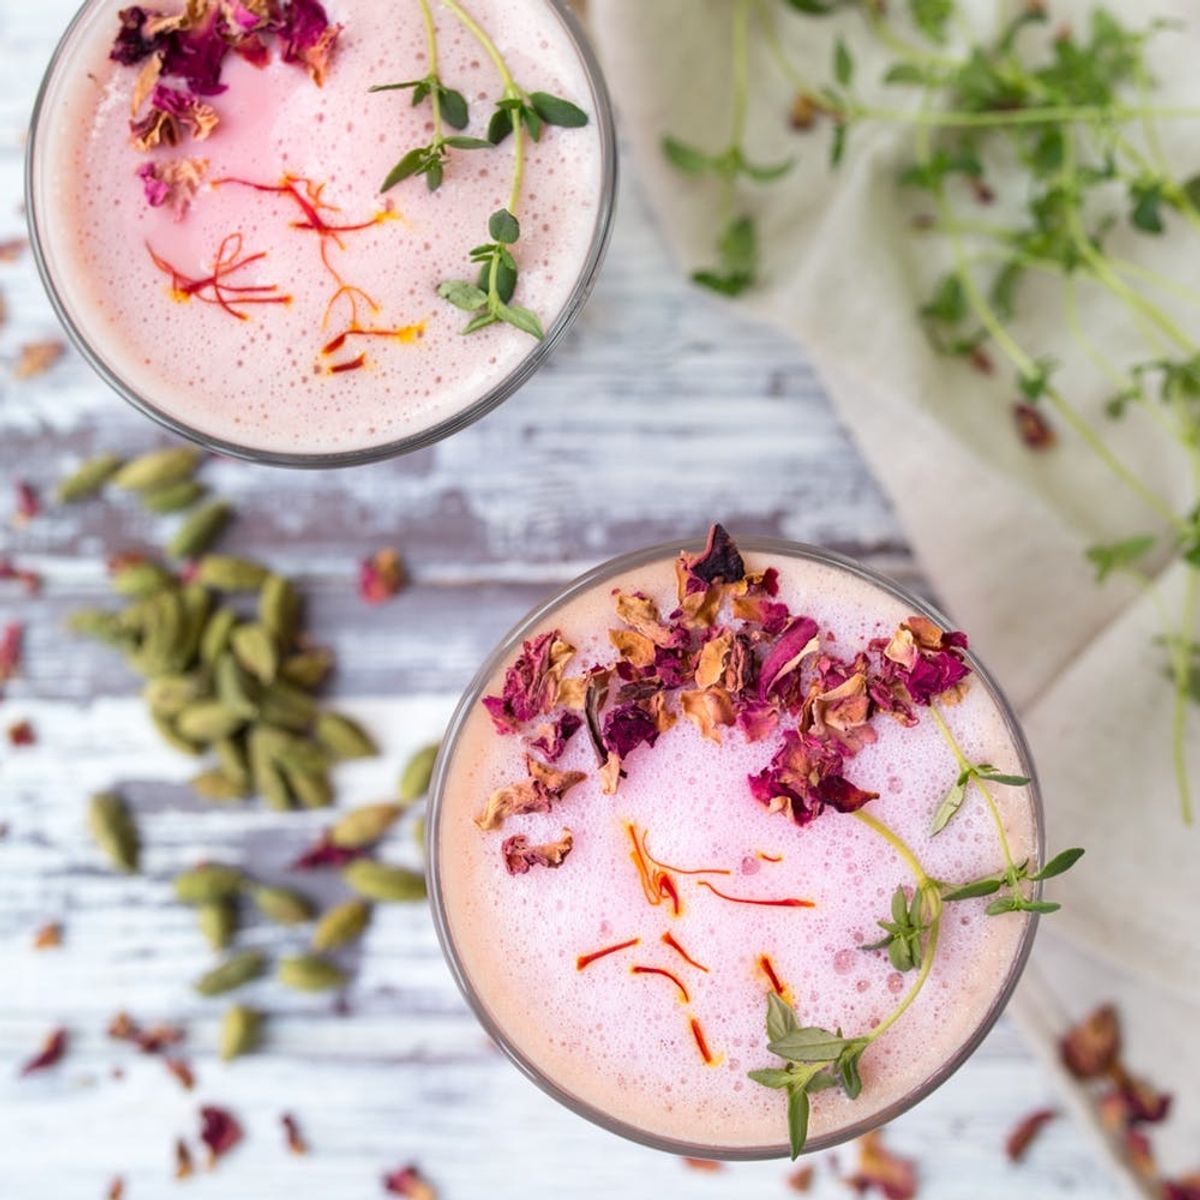 Get Your Caffeine Hit With Our Spiced Rose Latte Recipe